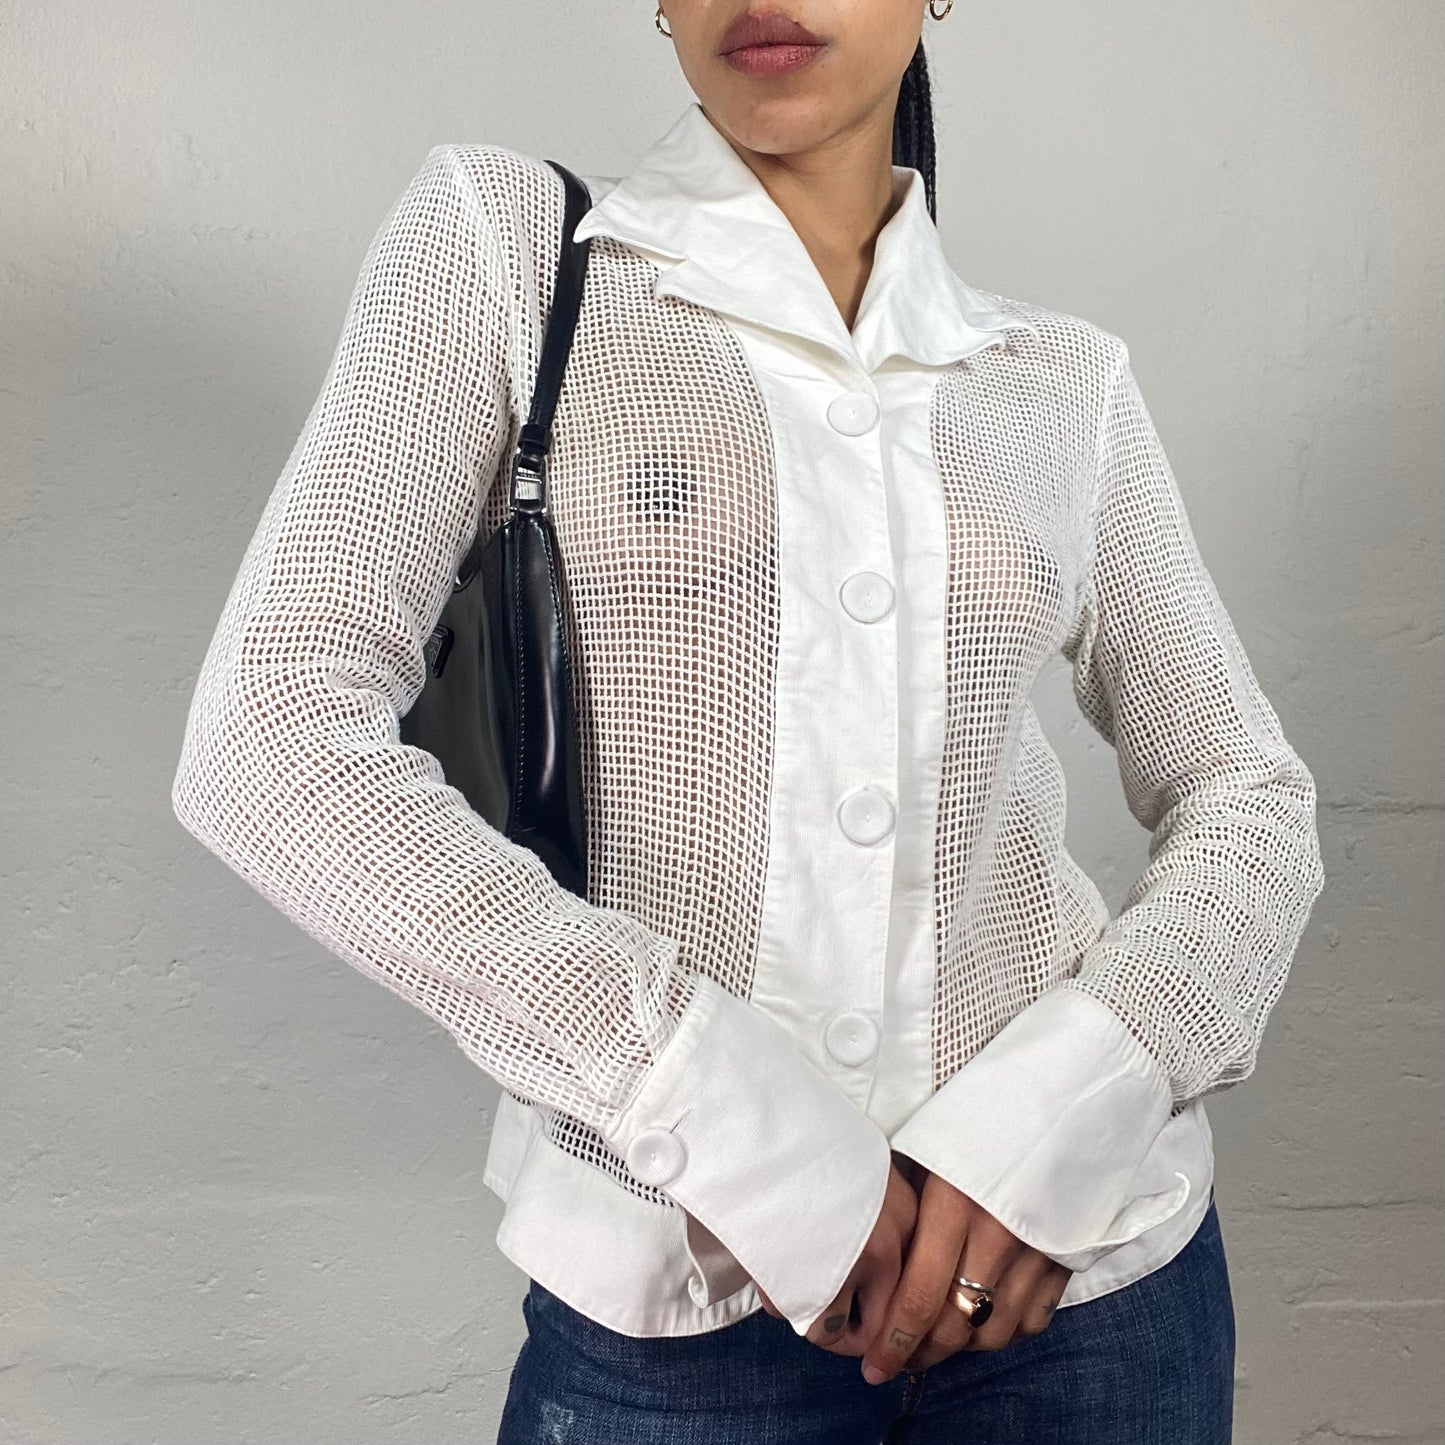 Vintage 2000's Soft Girl White Net Effect Longsleeve Button Up Blazer Style Collared Top (M)